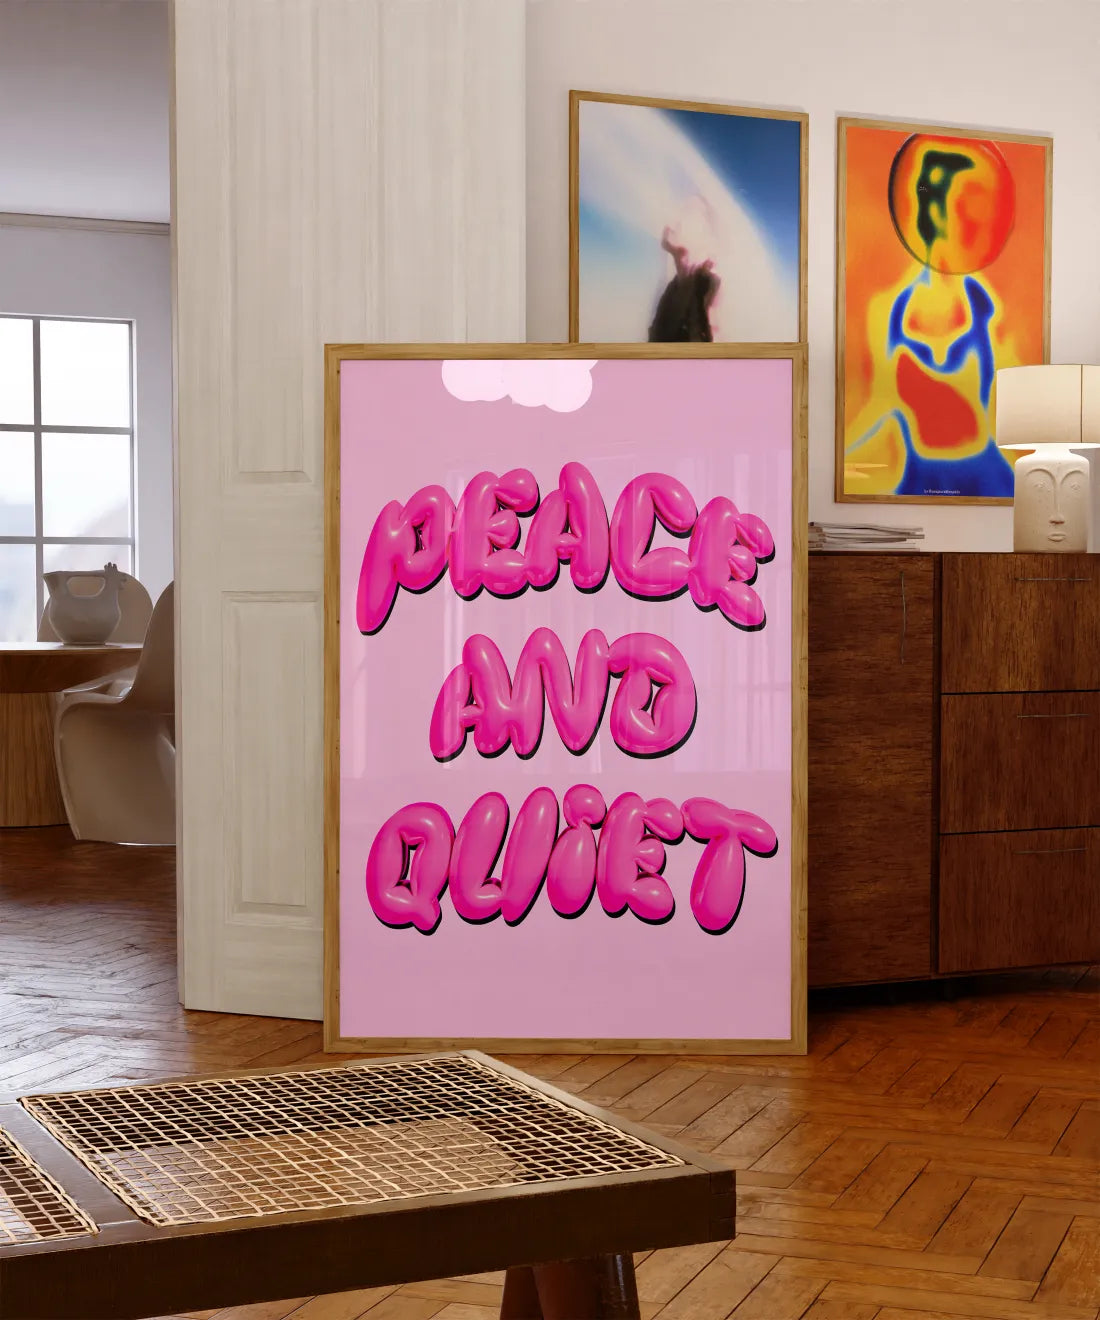 Peace and Quiet Poster